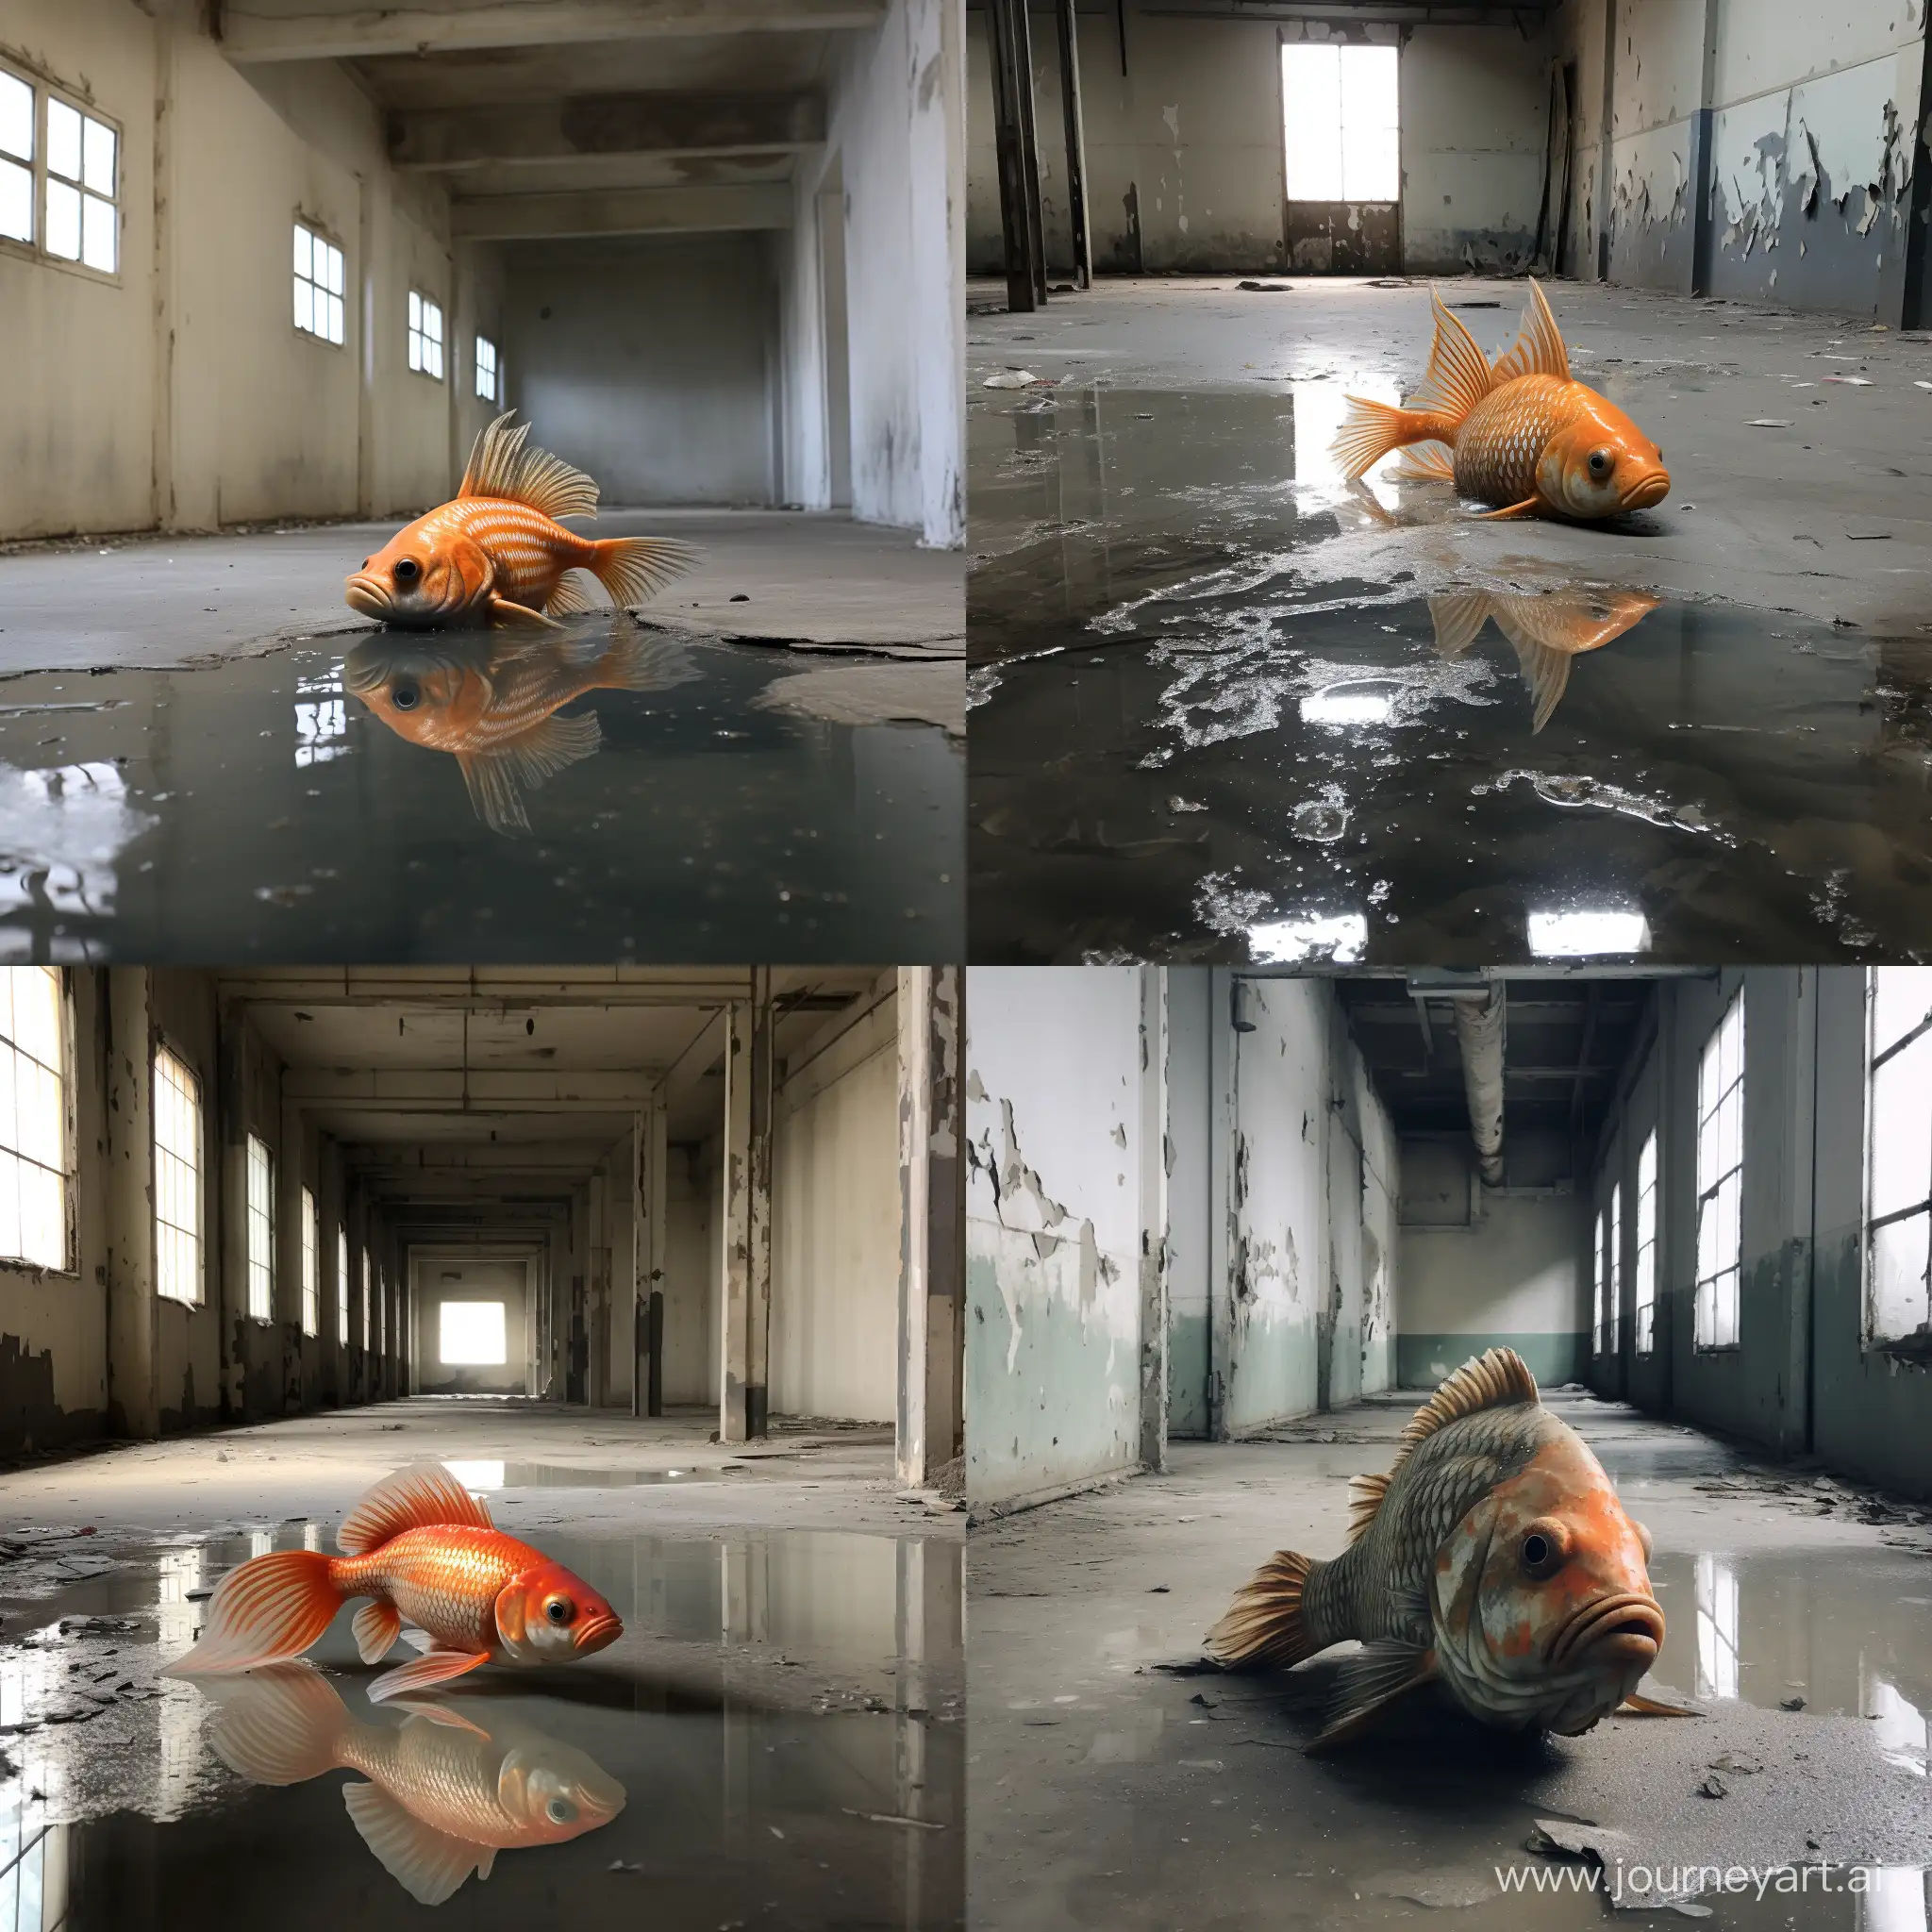 a fish flailing on the concrete floor